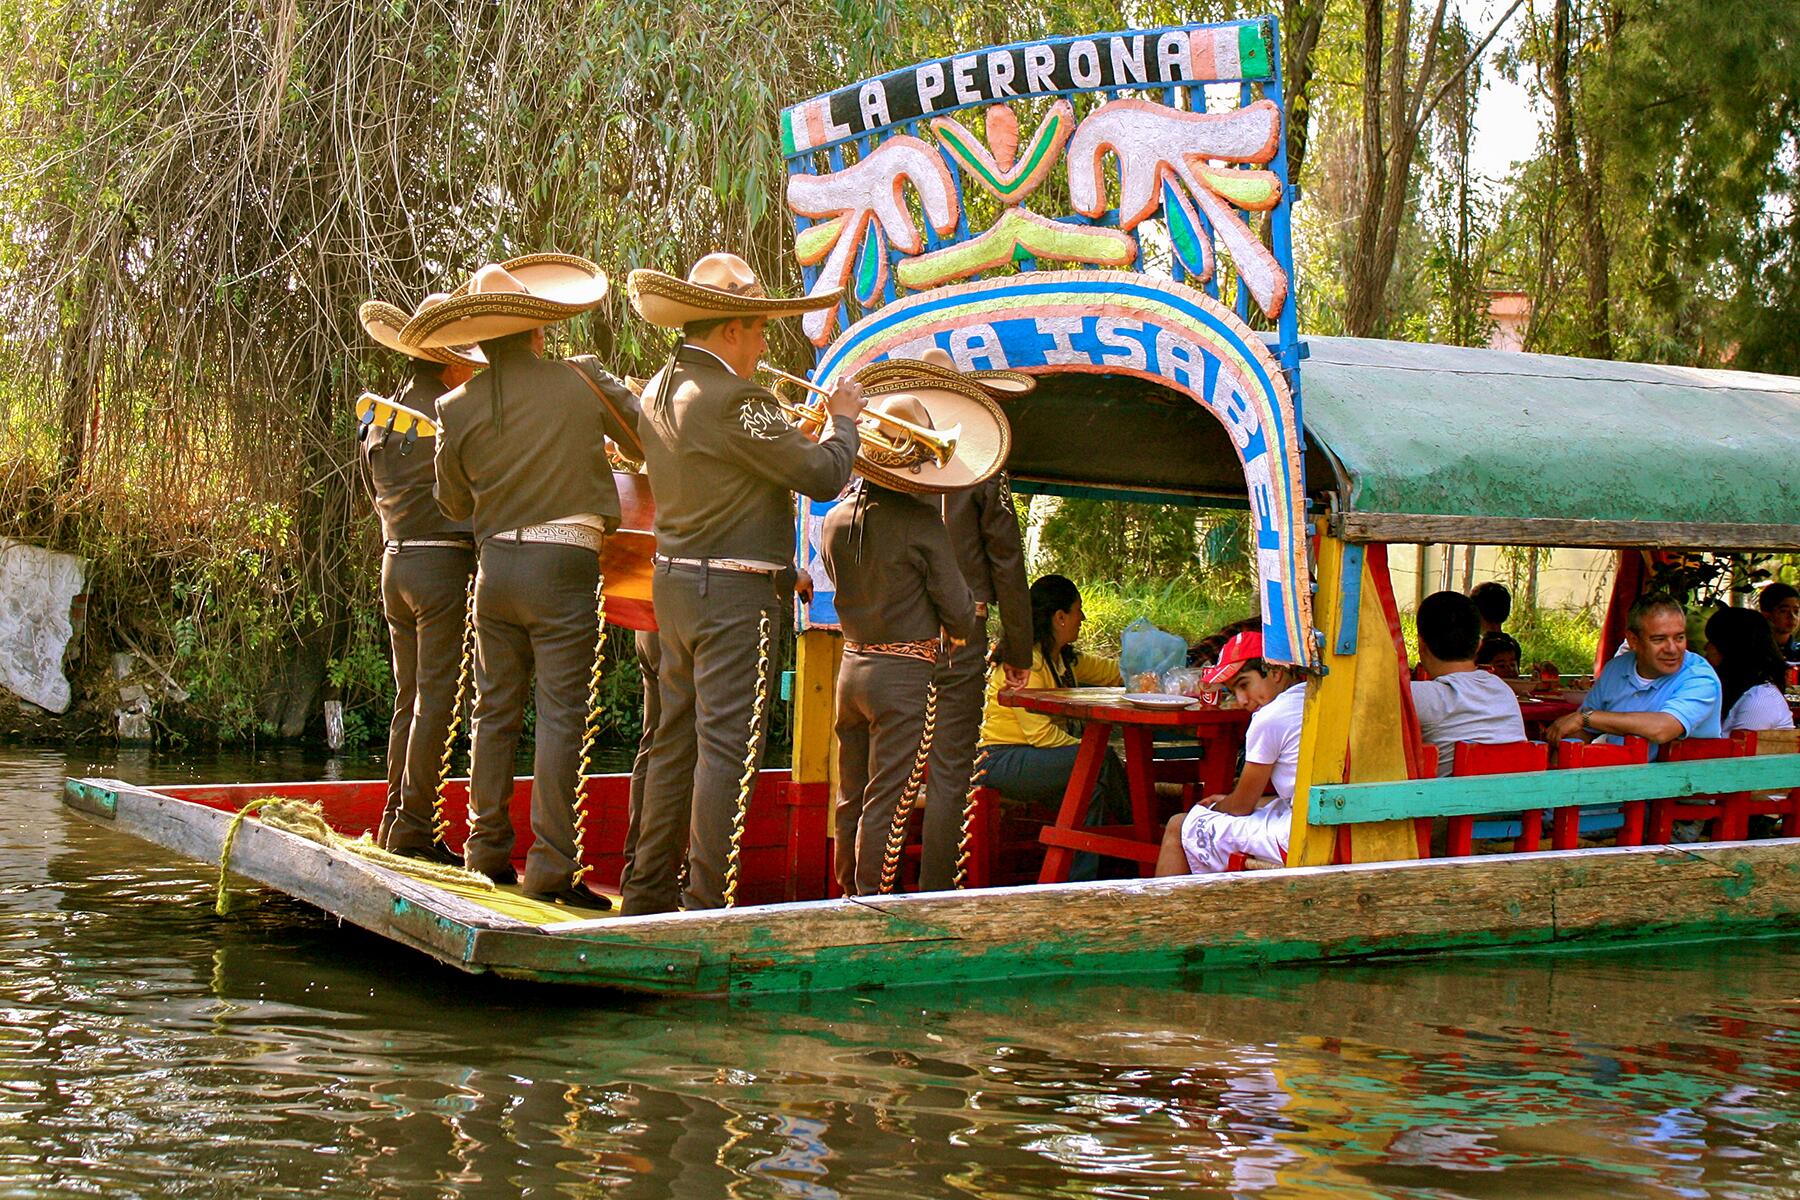 A Complete Guide to Visiting Mexico City's Xochimilco